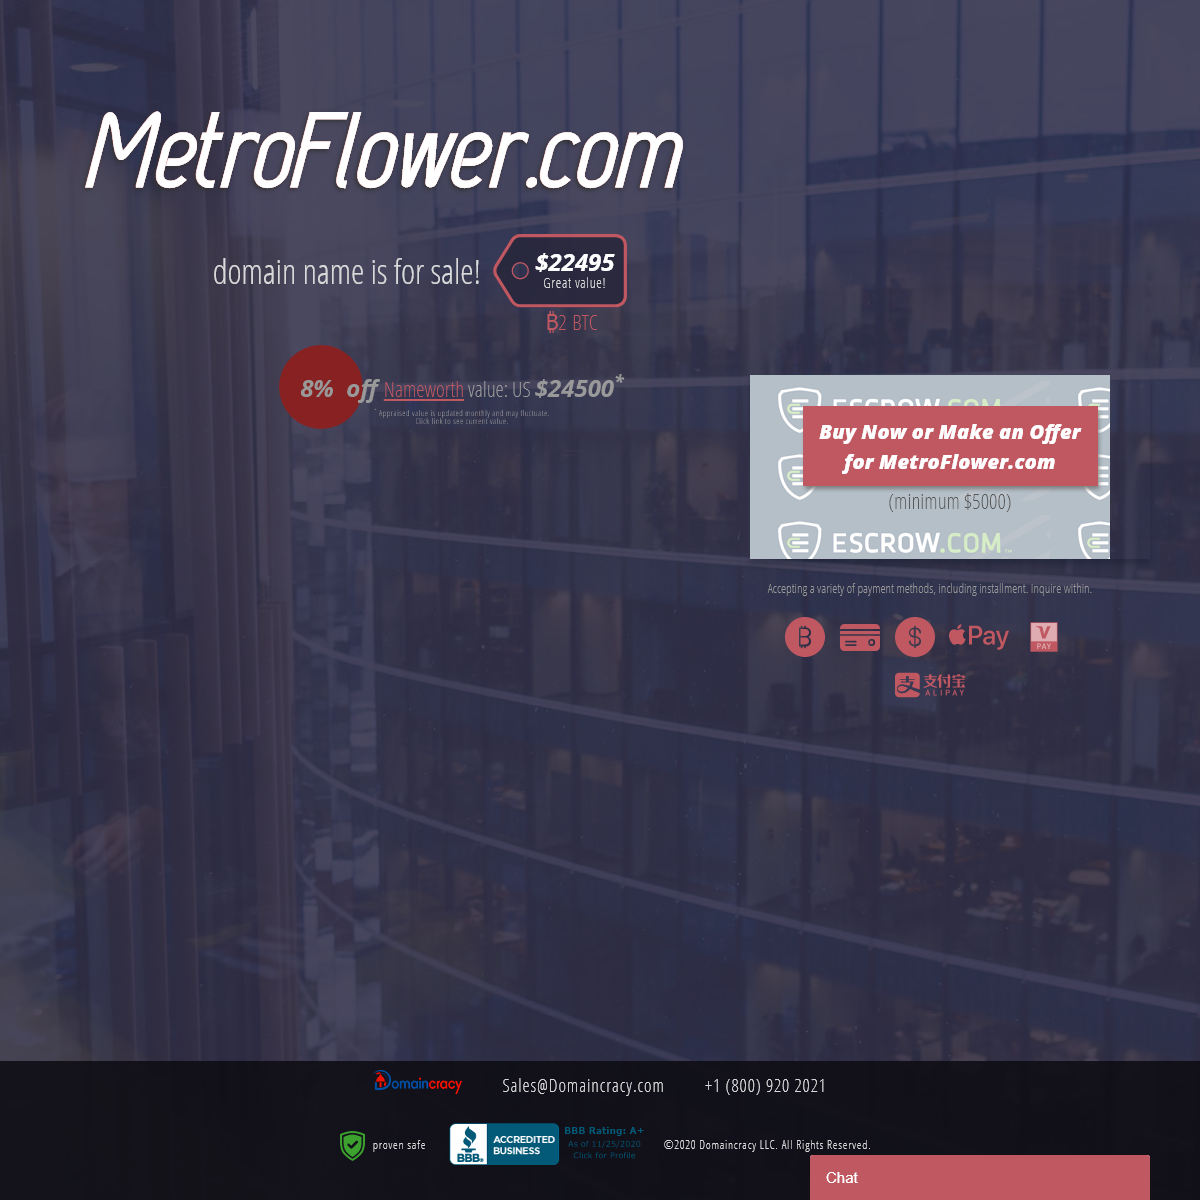 A complete backup of metroflower.com